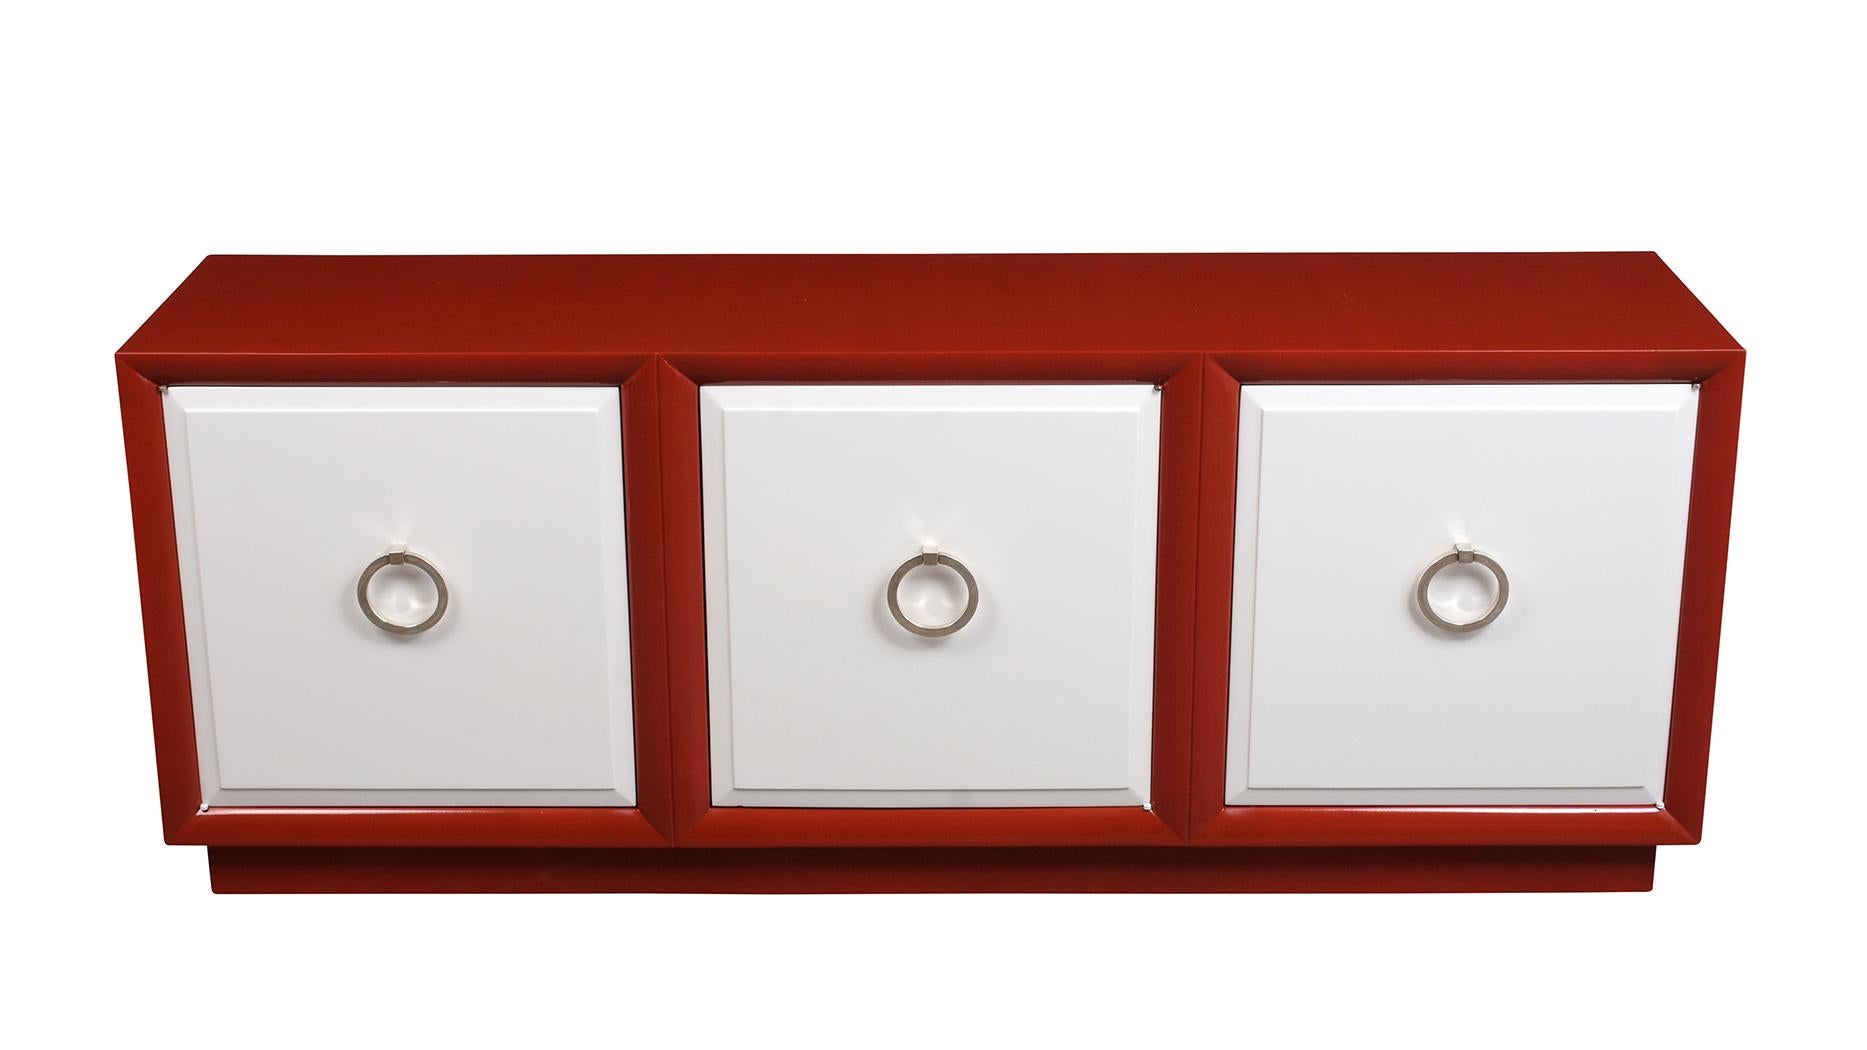 This elegant 3 door Mid-century credenza is stained in red and white color combination with a lacquer finish. This piece has three large doors with chrome round pull handles and an interior wood shelf for ample storage space and rests on a floating